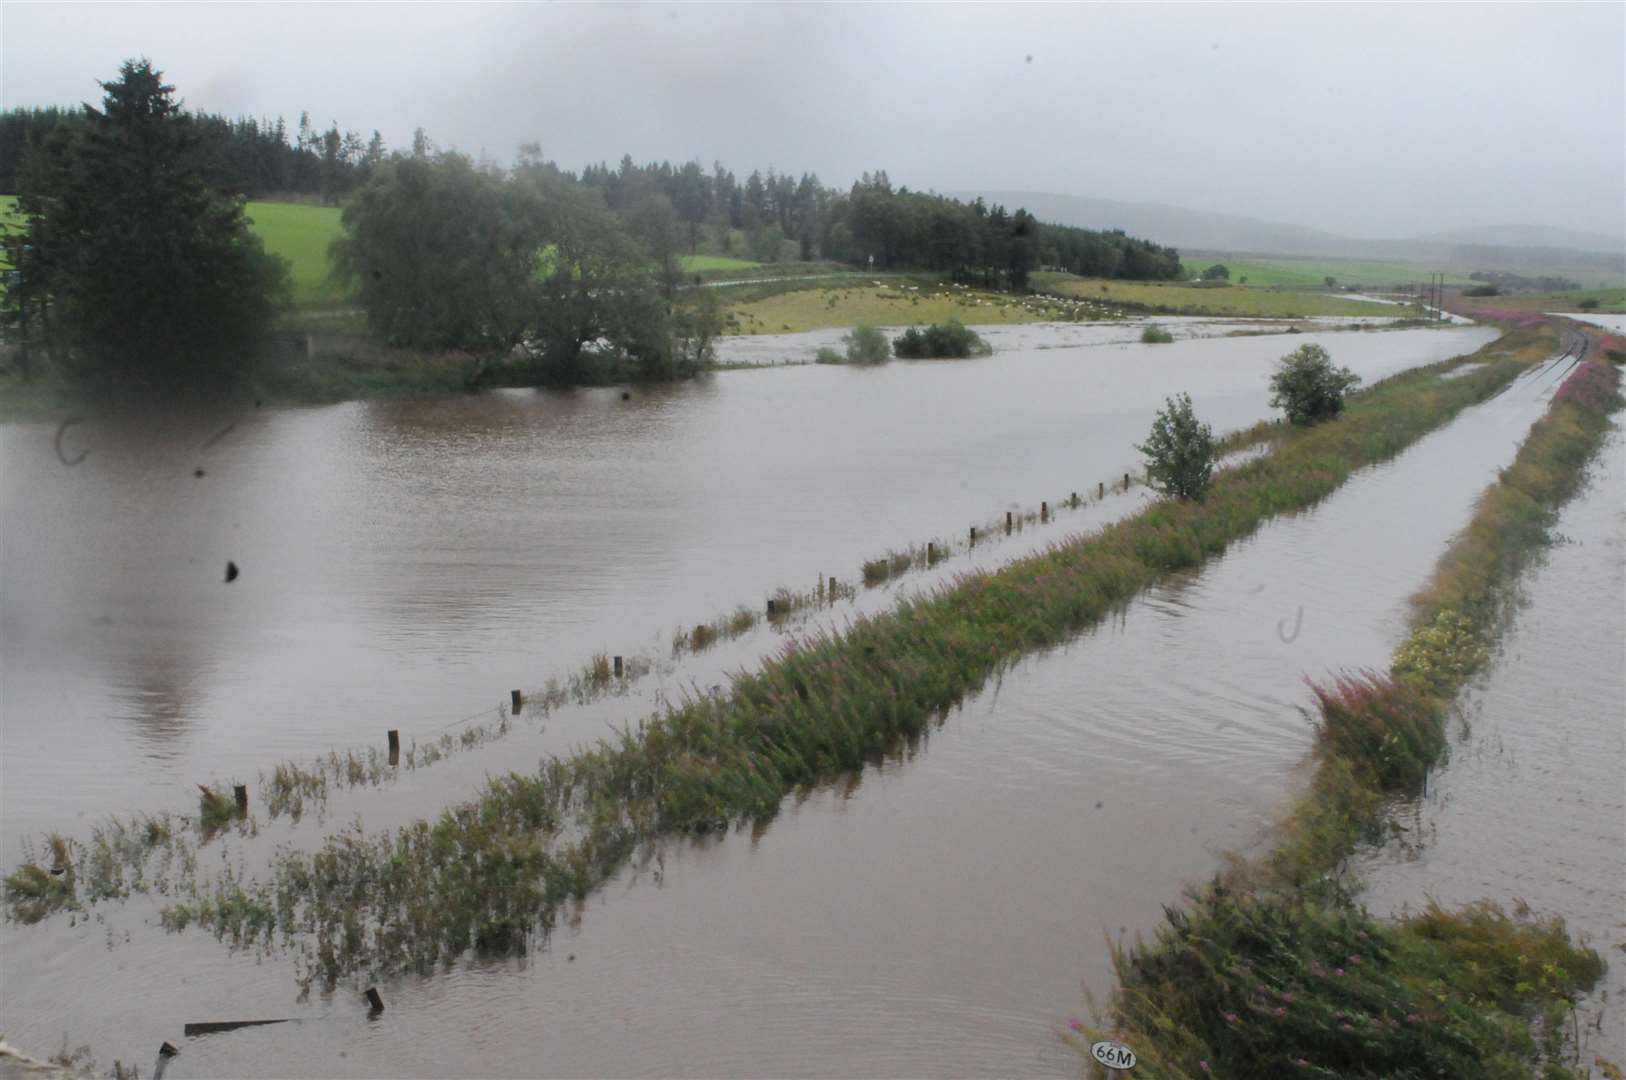 Flooding on the Inverness-Aberdeen railway line.